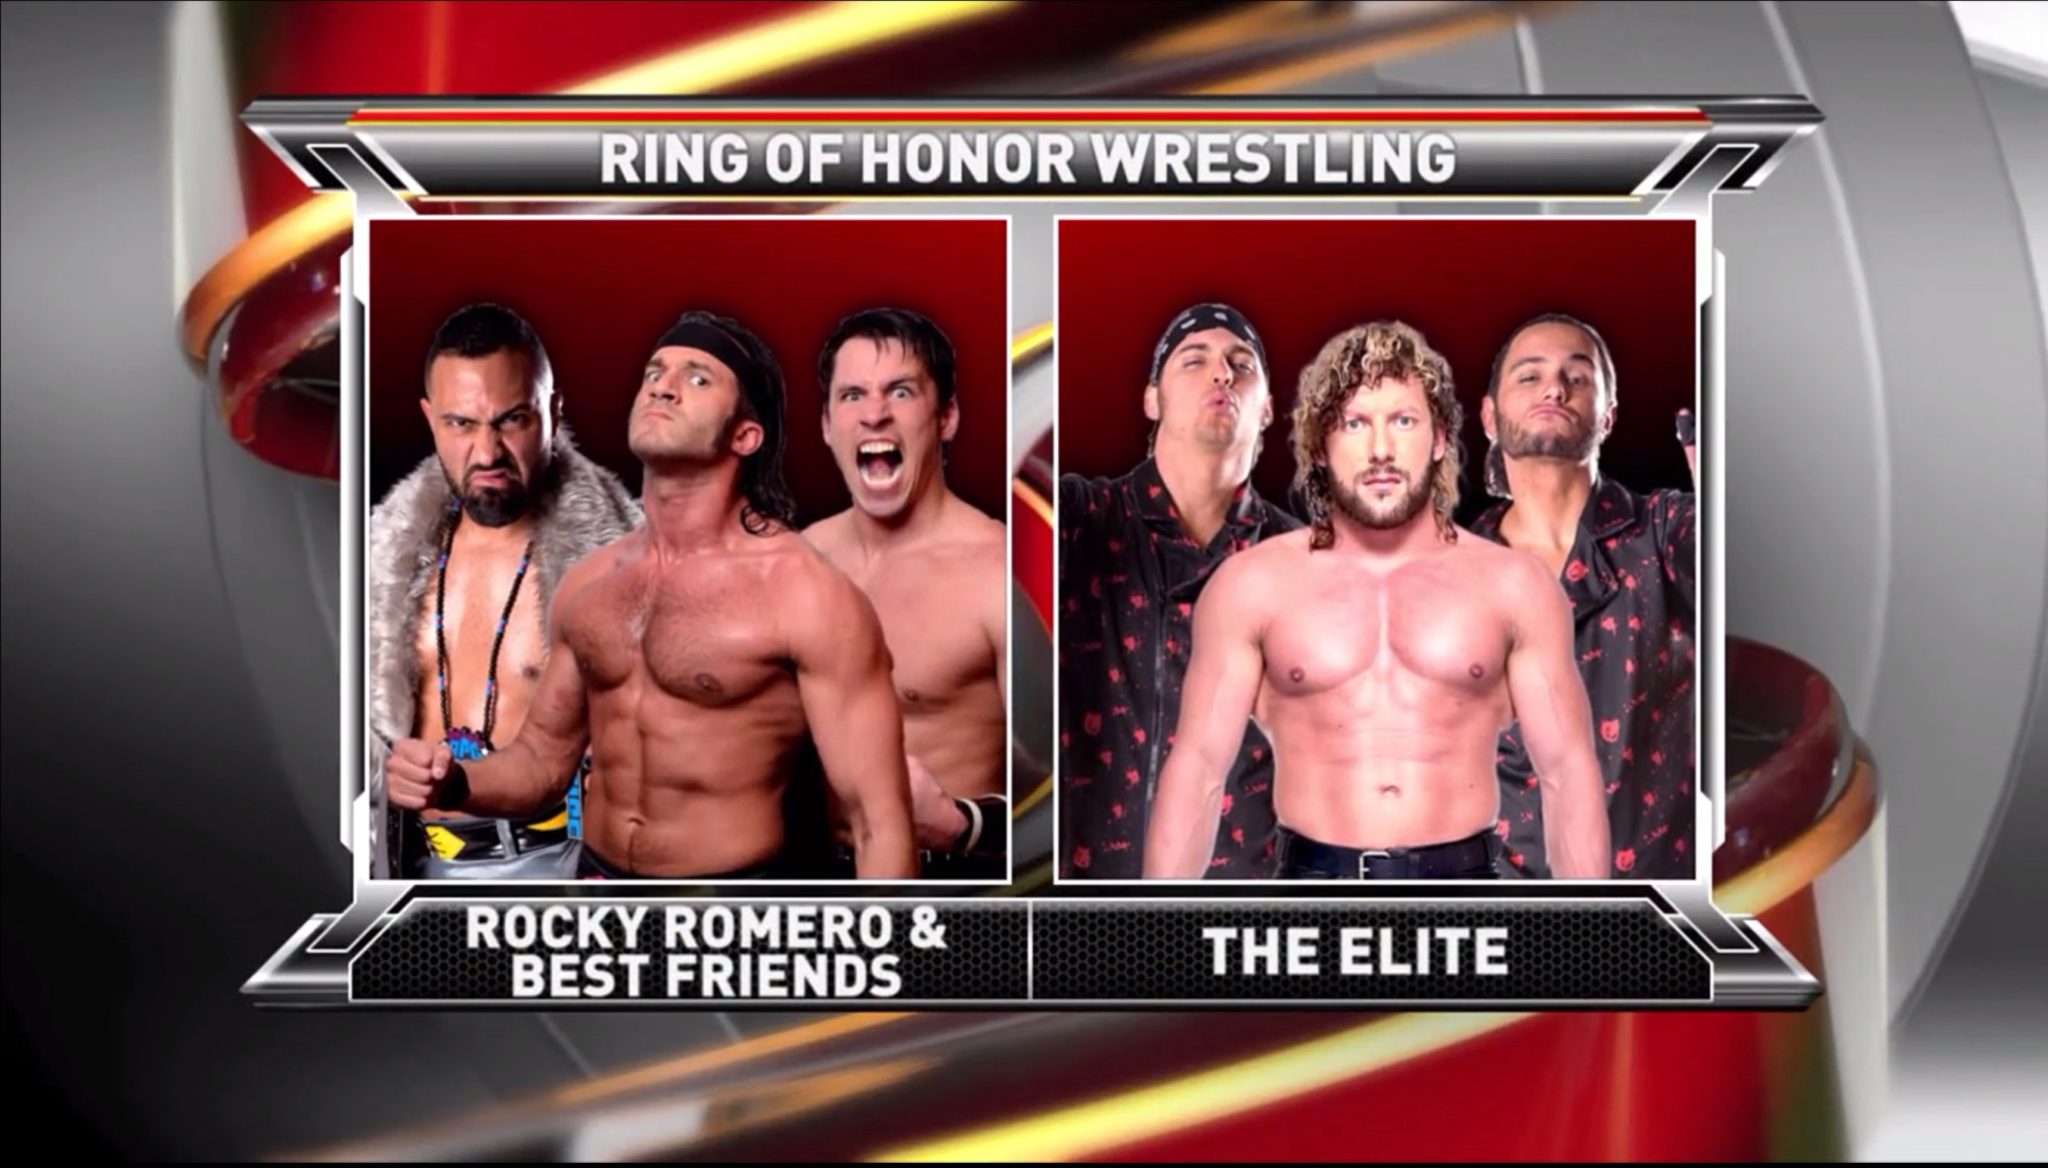 ROH 12/17/17 TV Review: The Elite vs Rocky Romero and The Best Friends